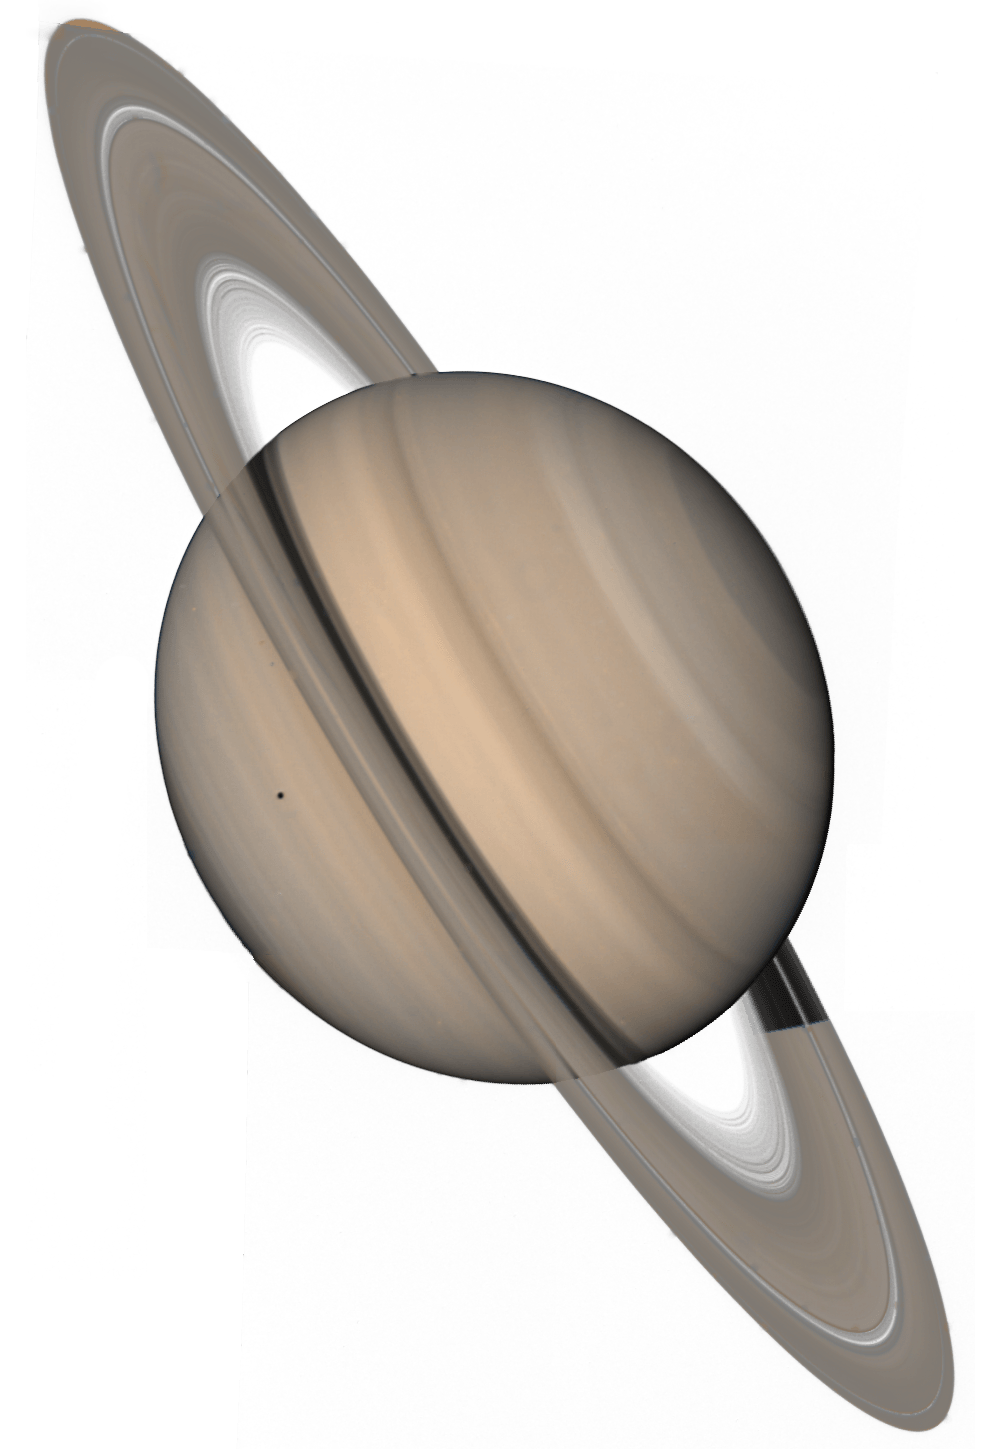 Planet Saturn associated with the numerology of 89